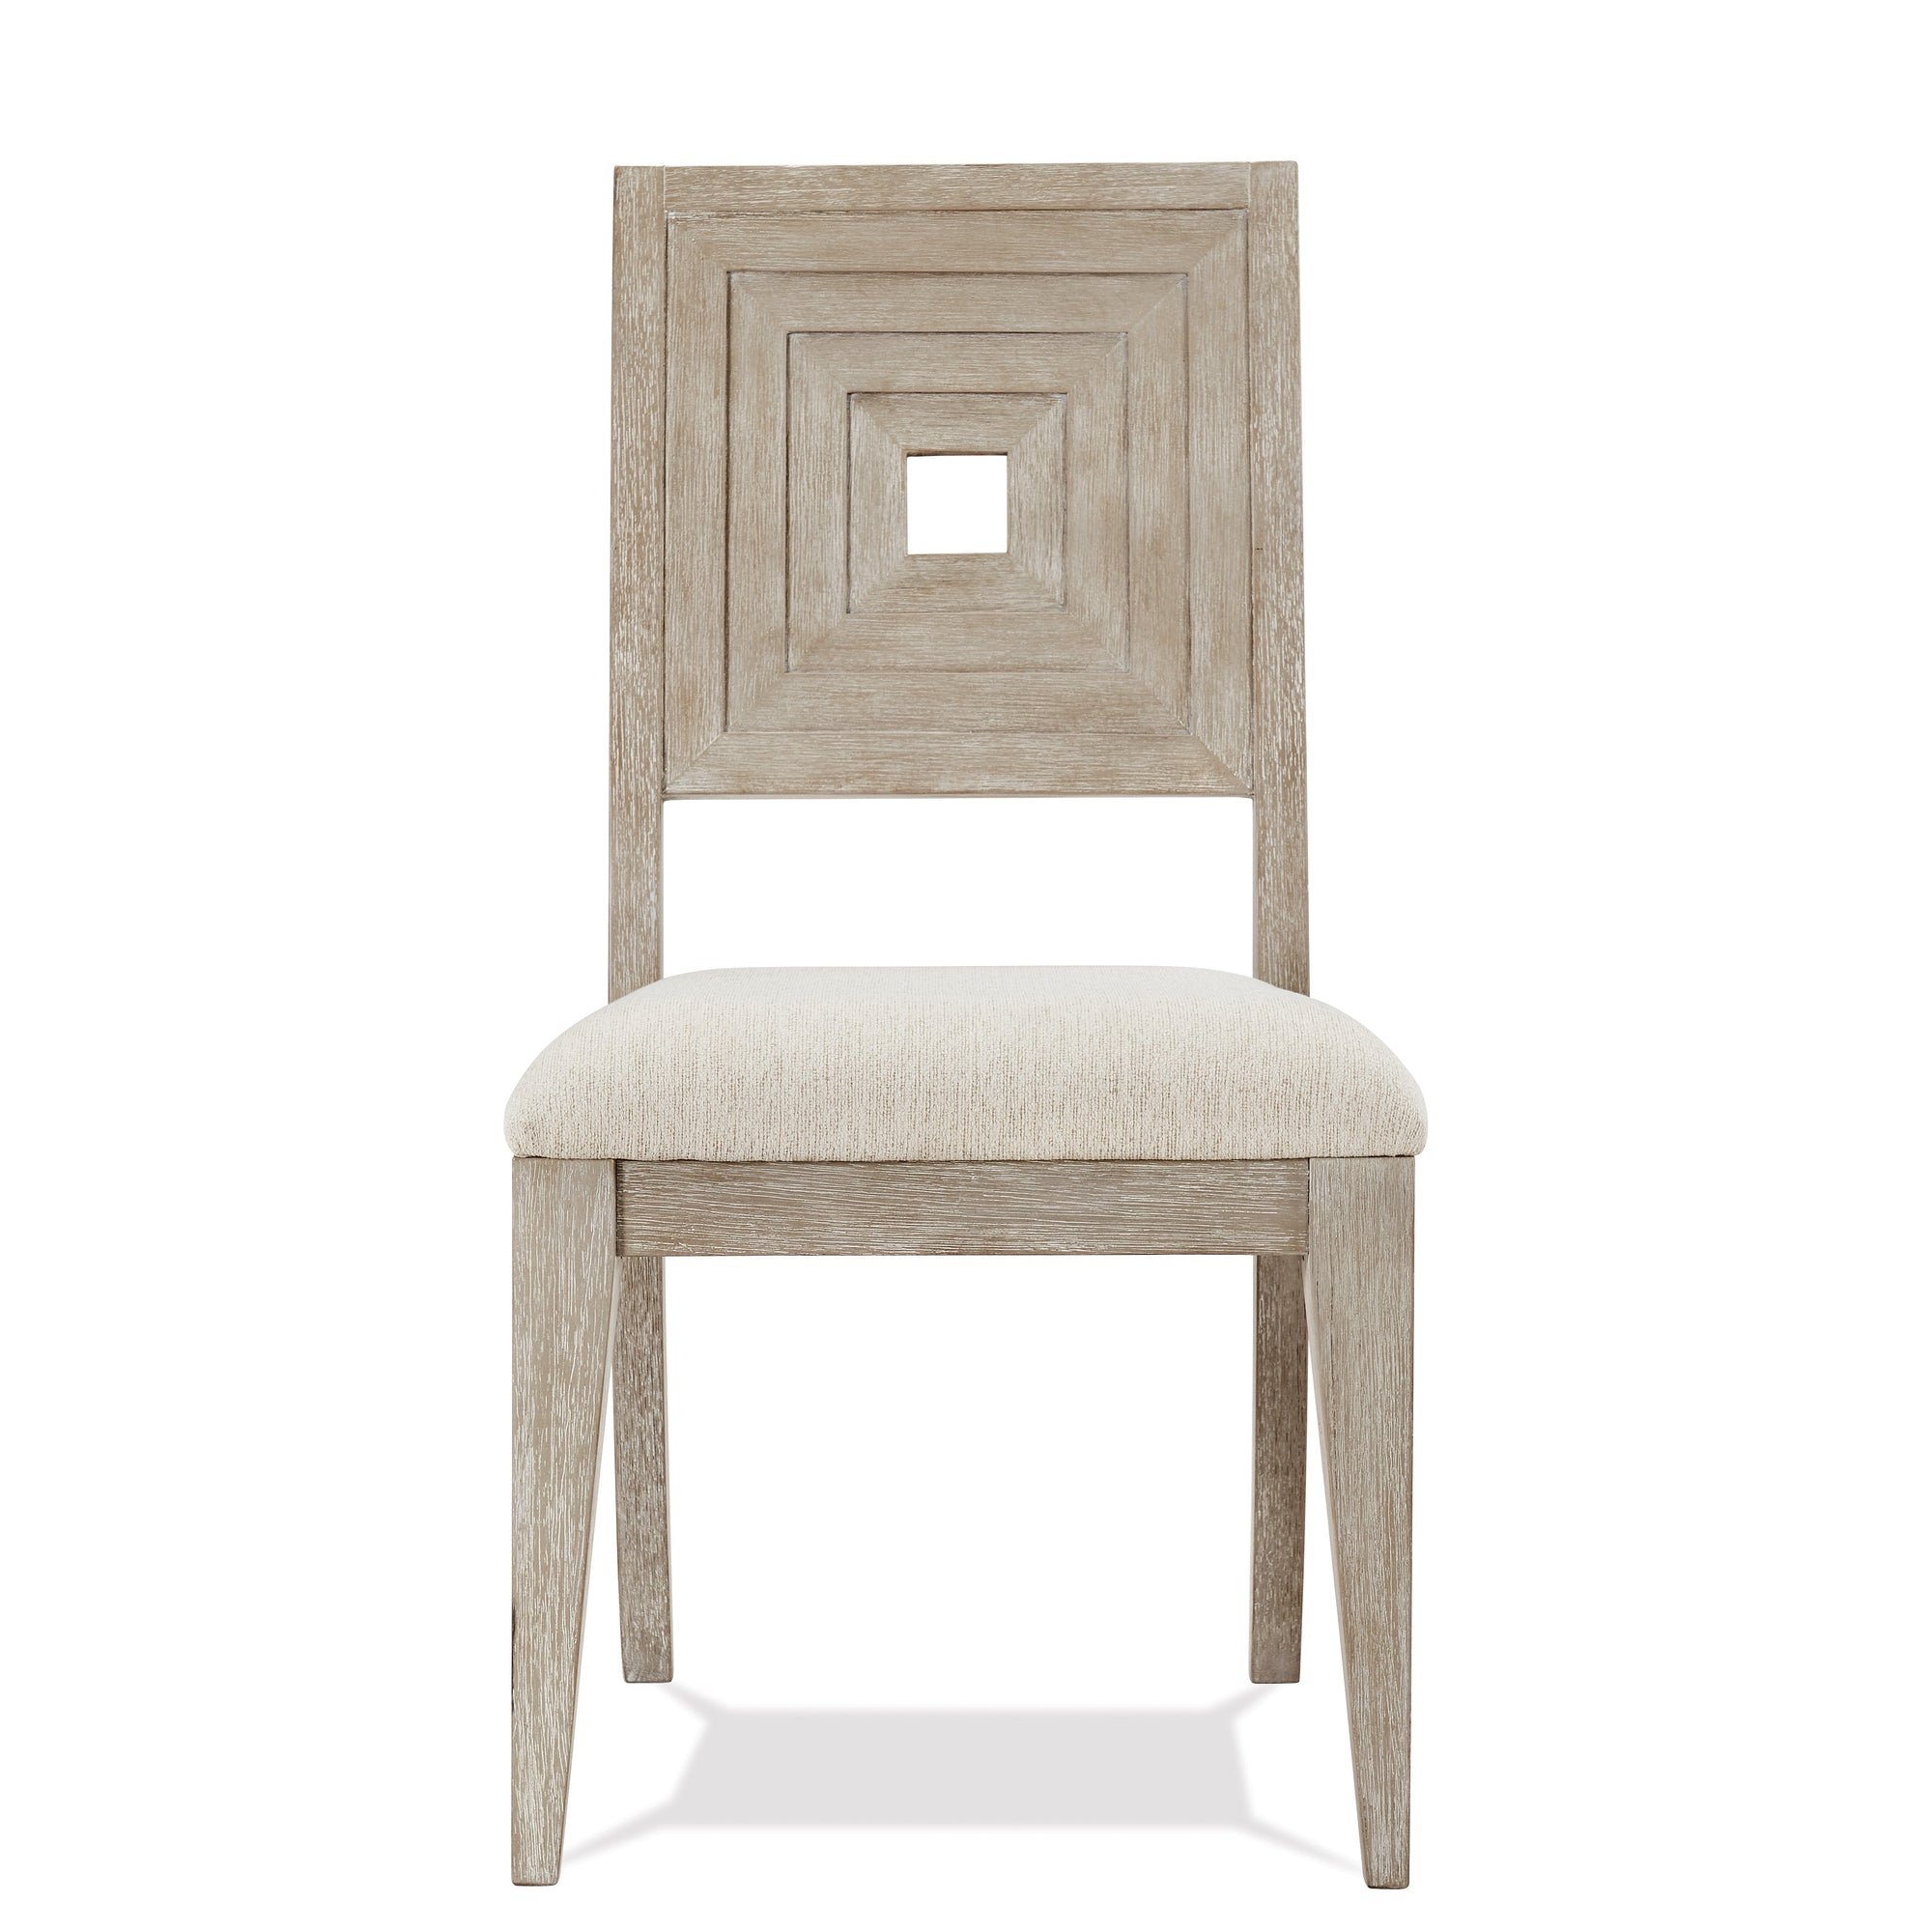 Stepstone Upholstered Wood Back Arm Chair